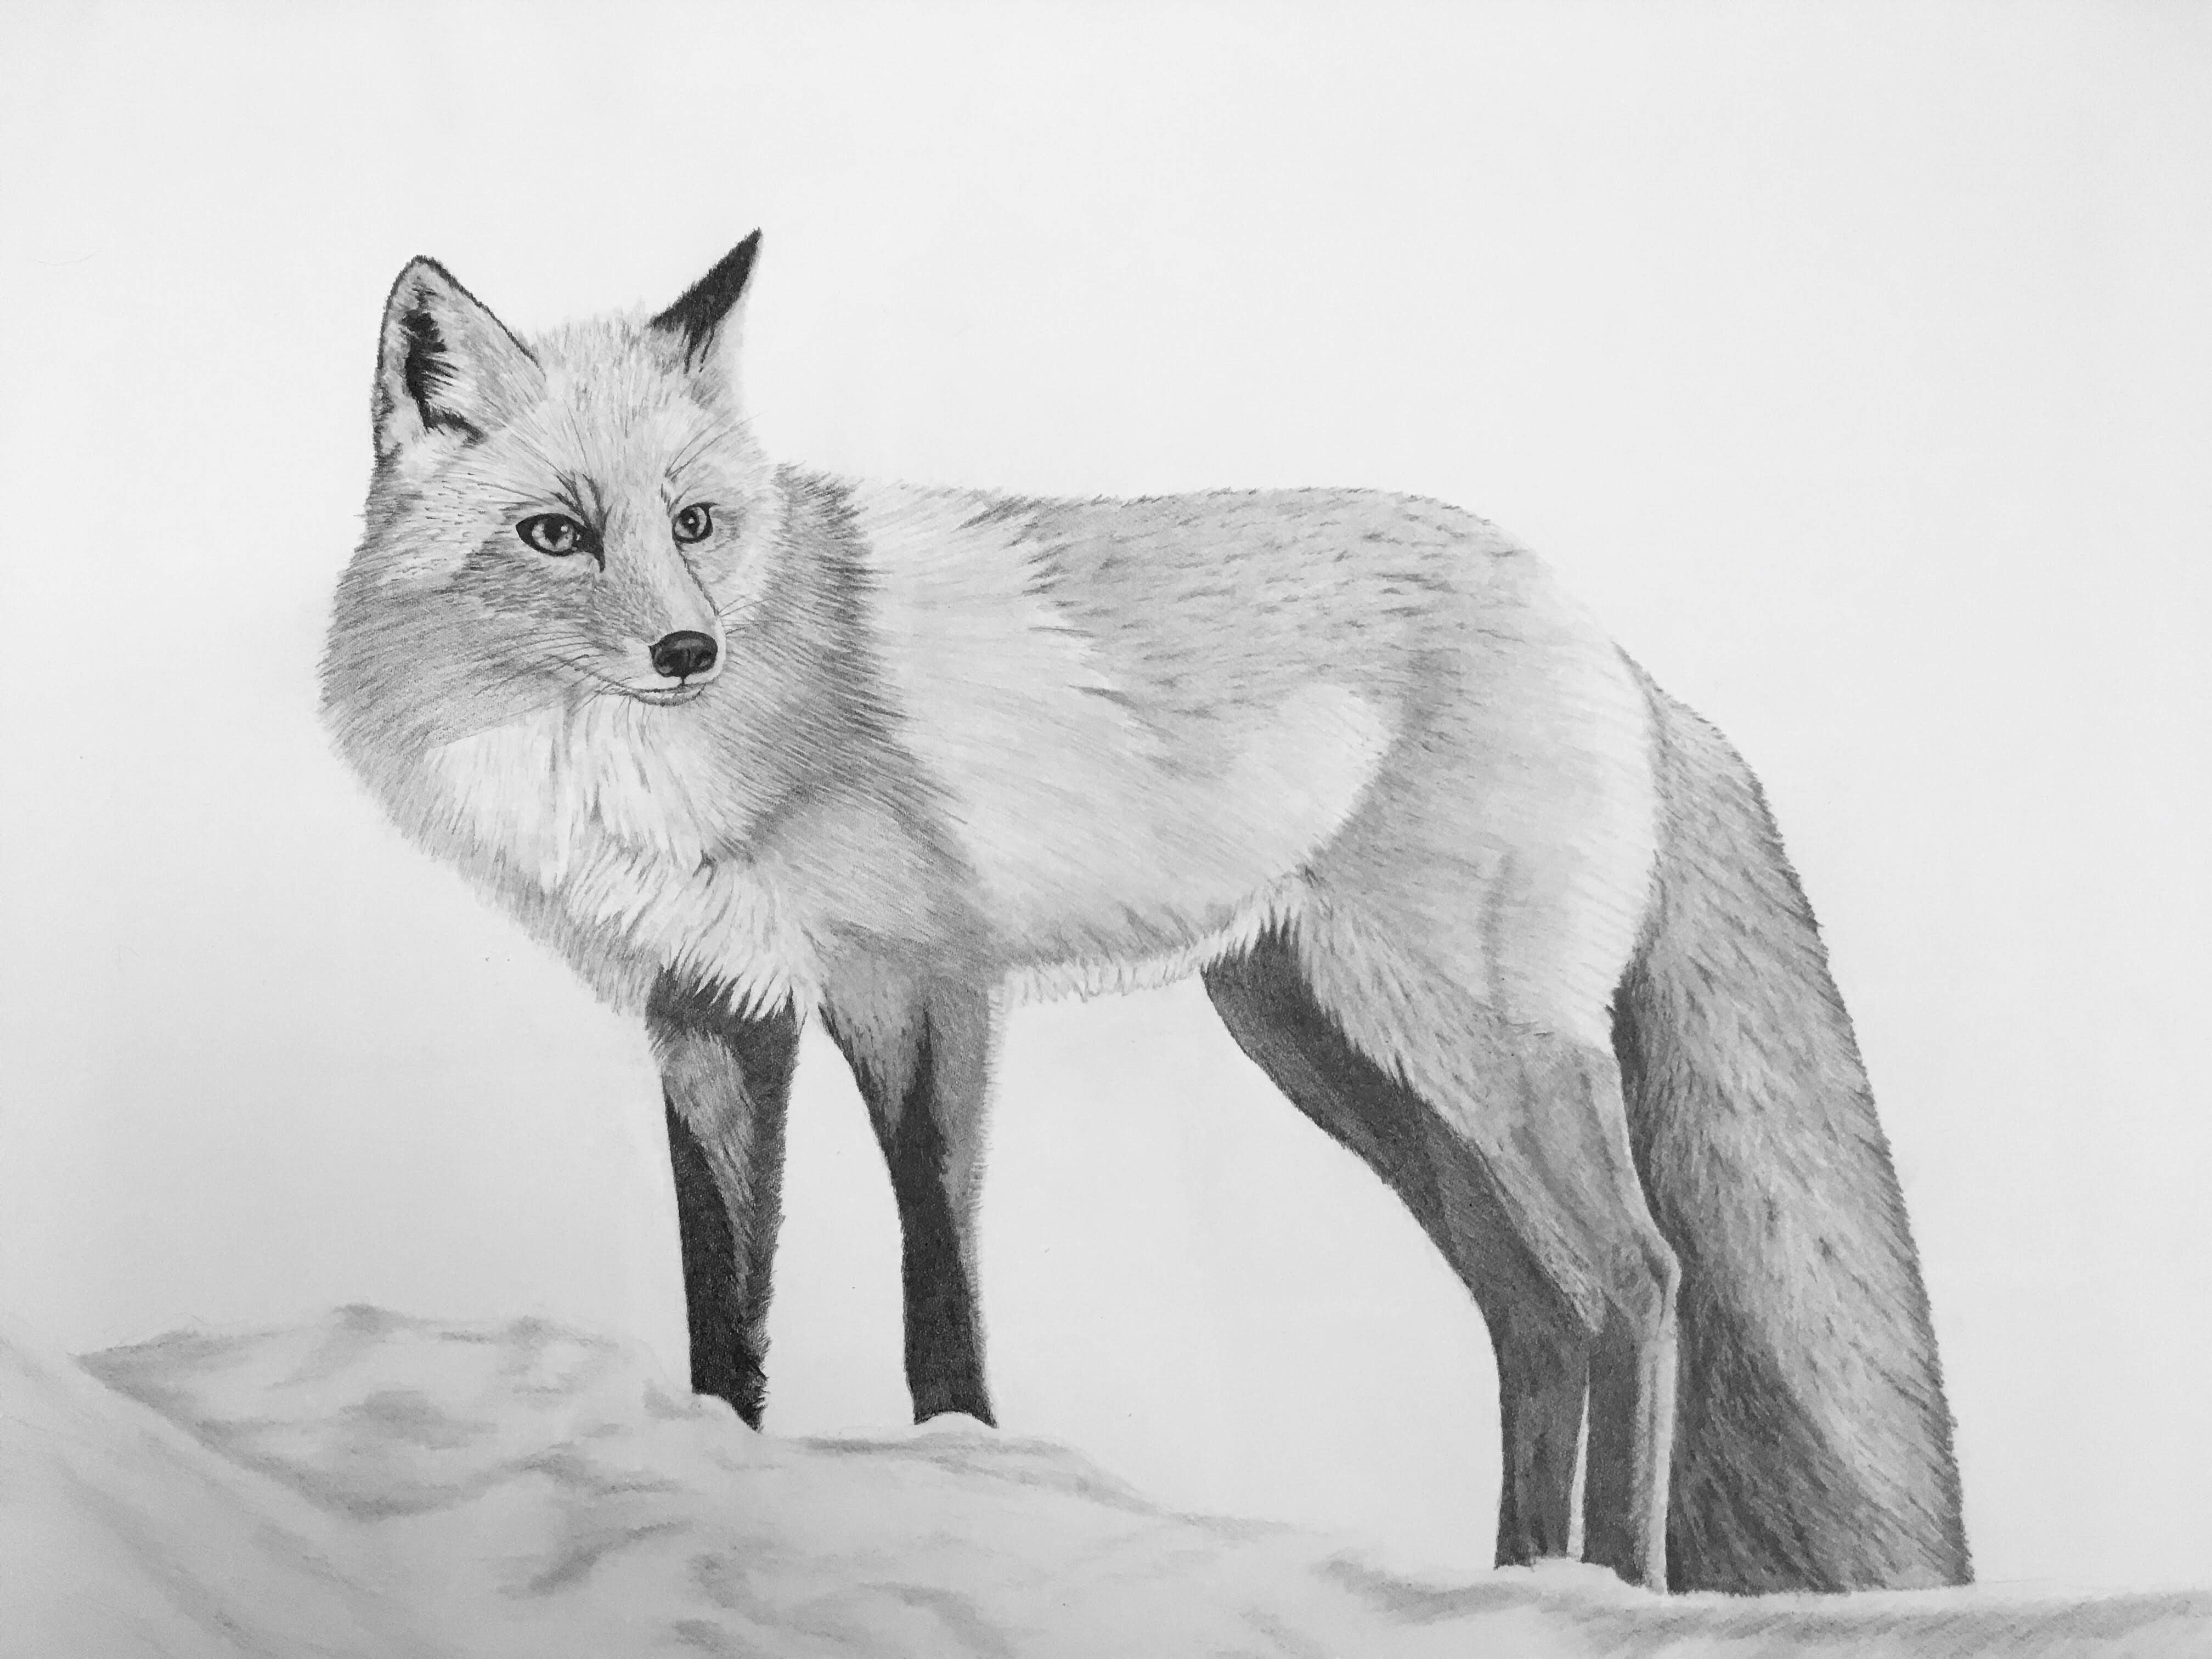 How to draw a fox using Indian ink